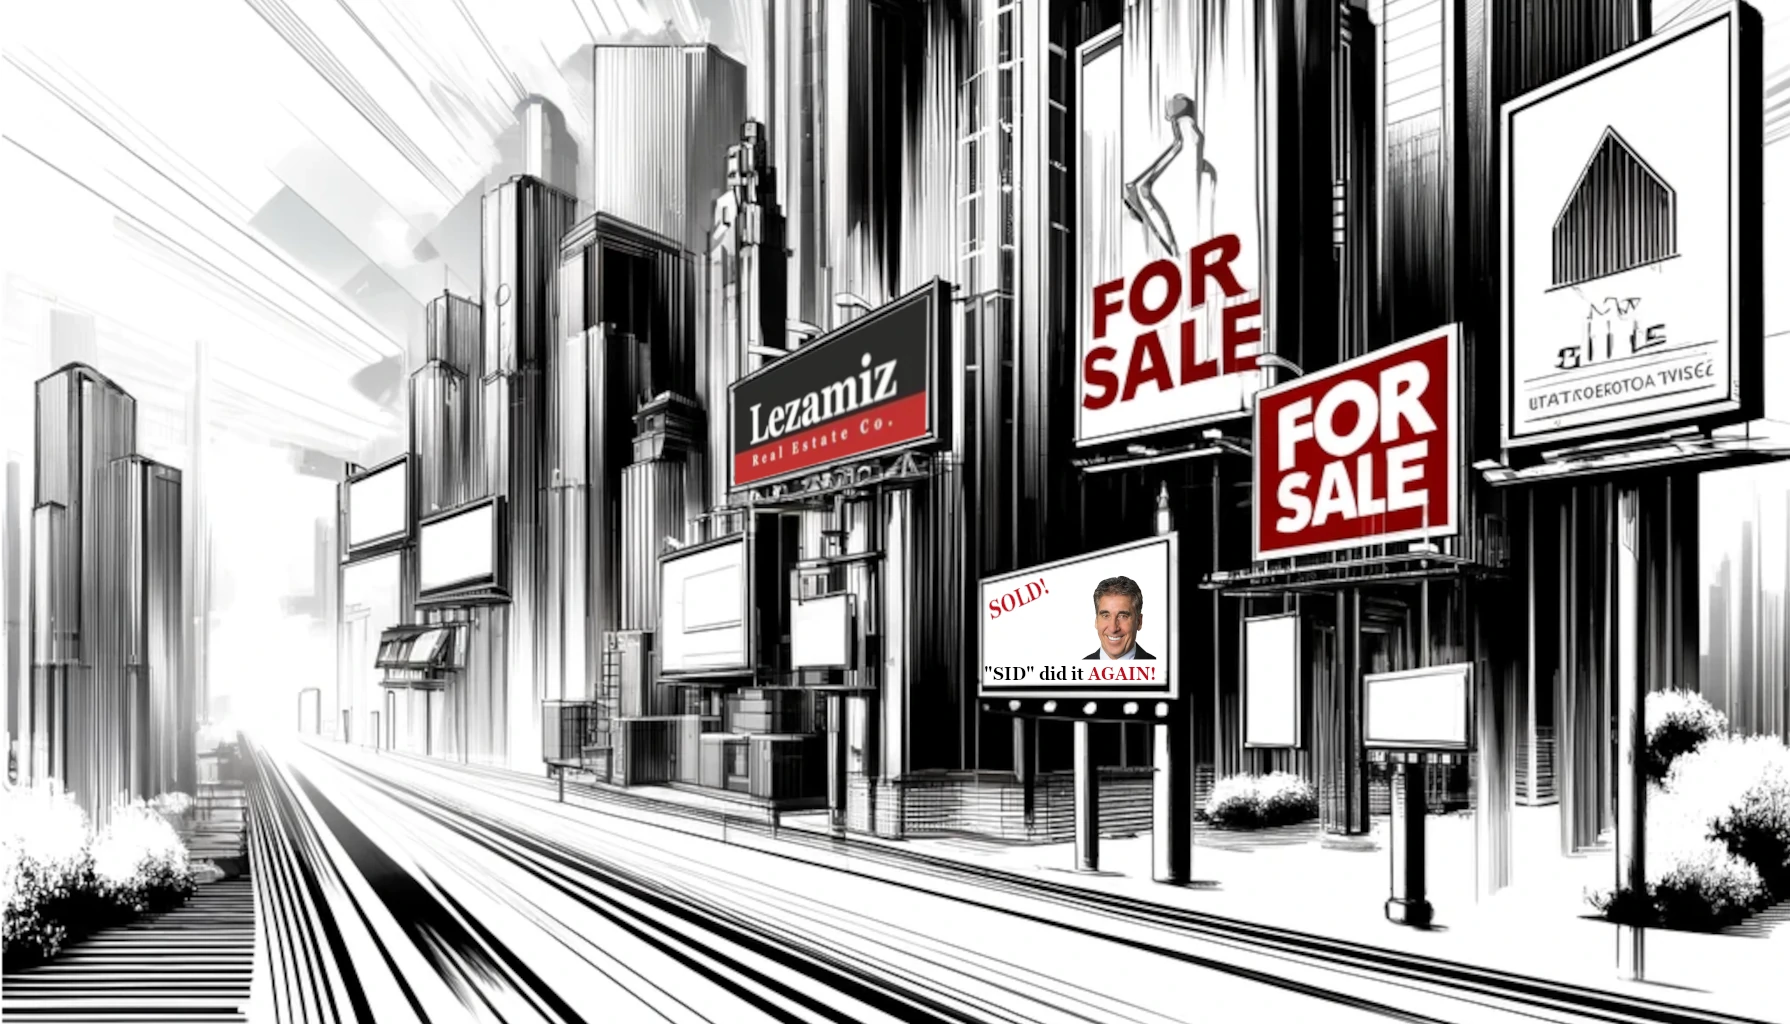 Black and white illustration of an urban commercial street lined with skyscrapers and multiple 'For Sale' signs on billboards and buildings.